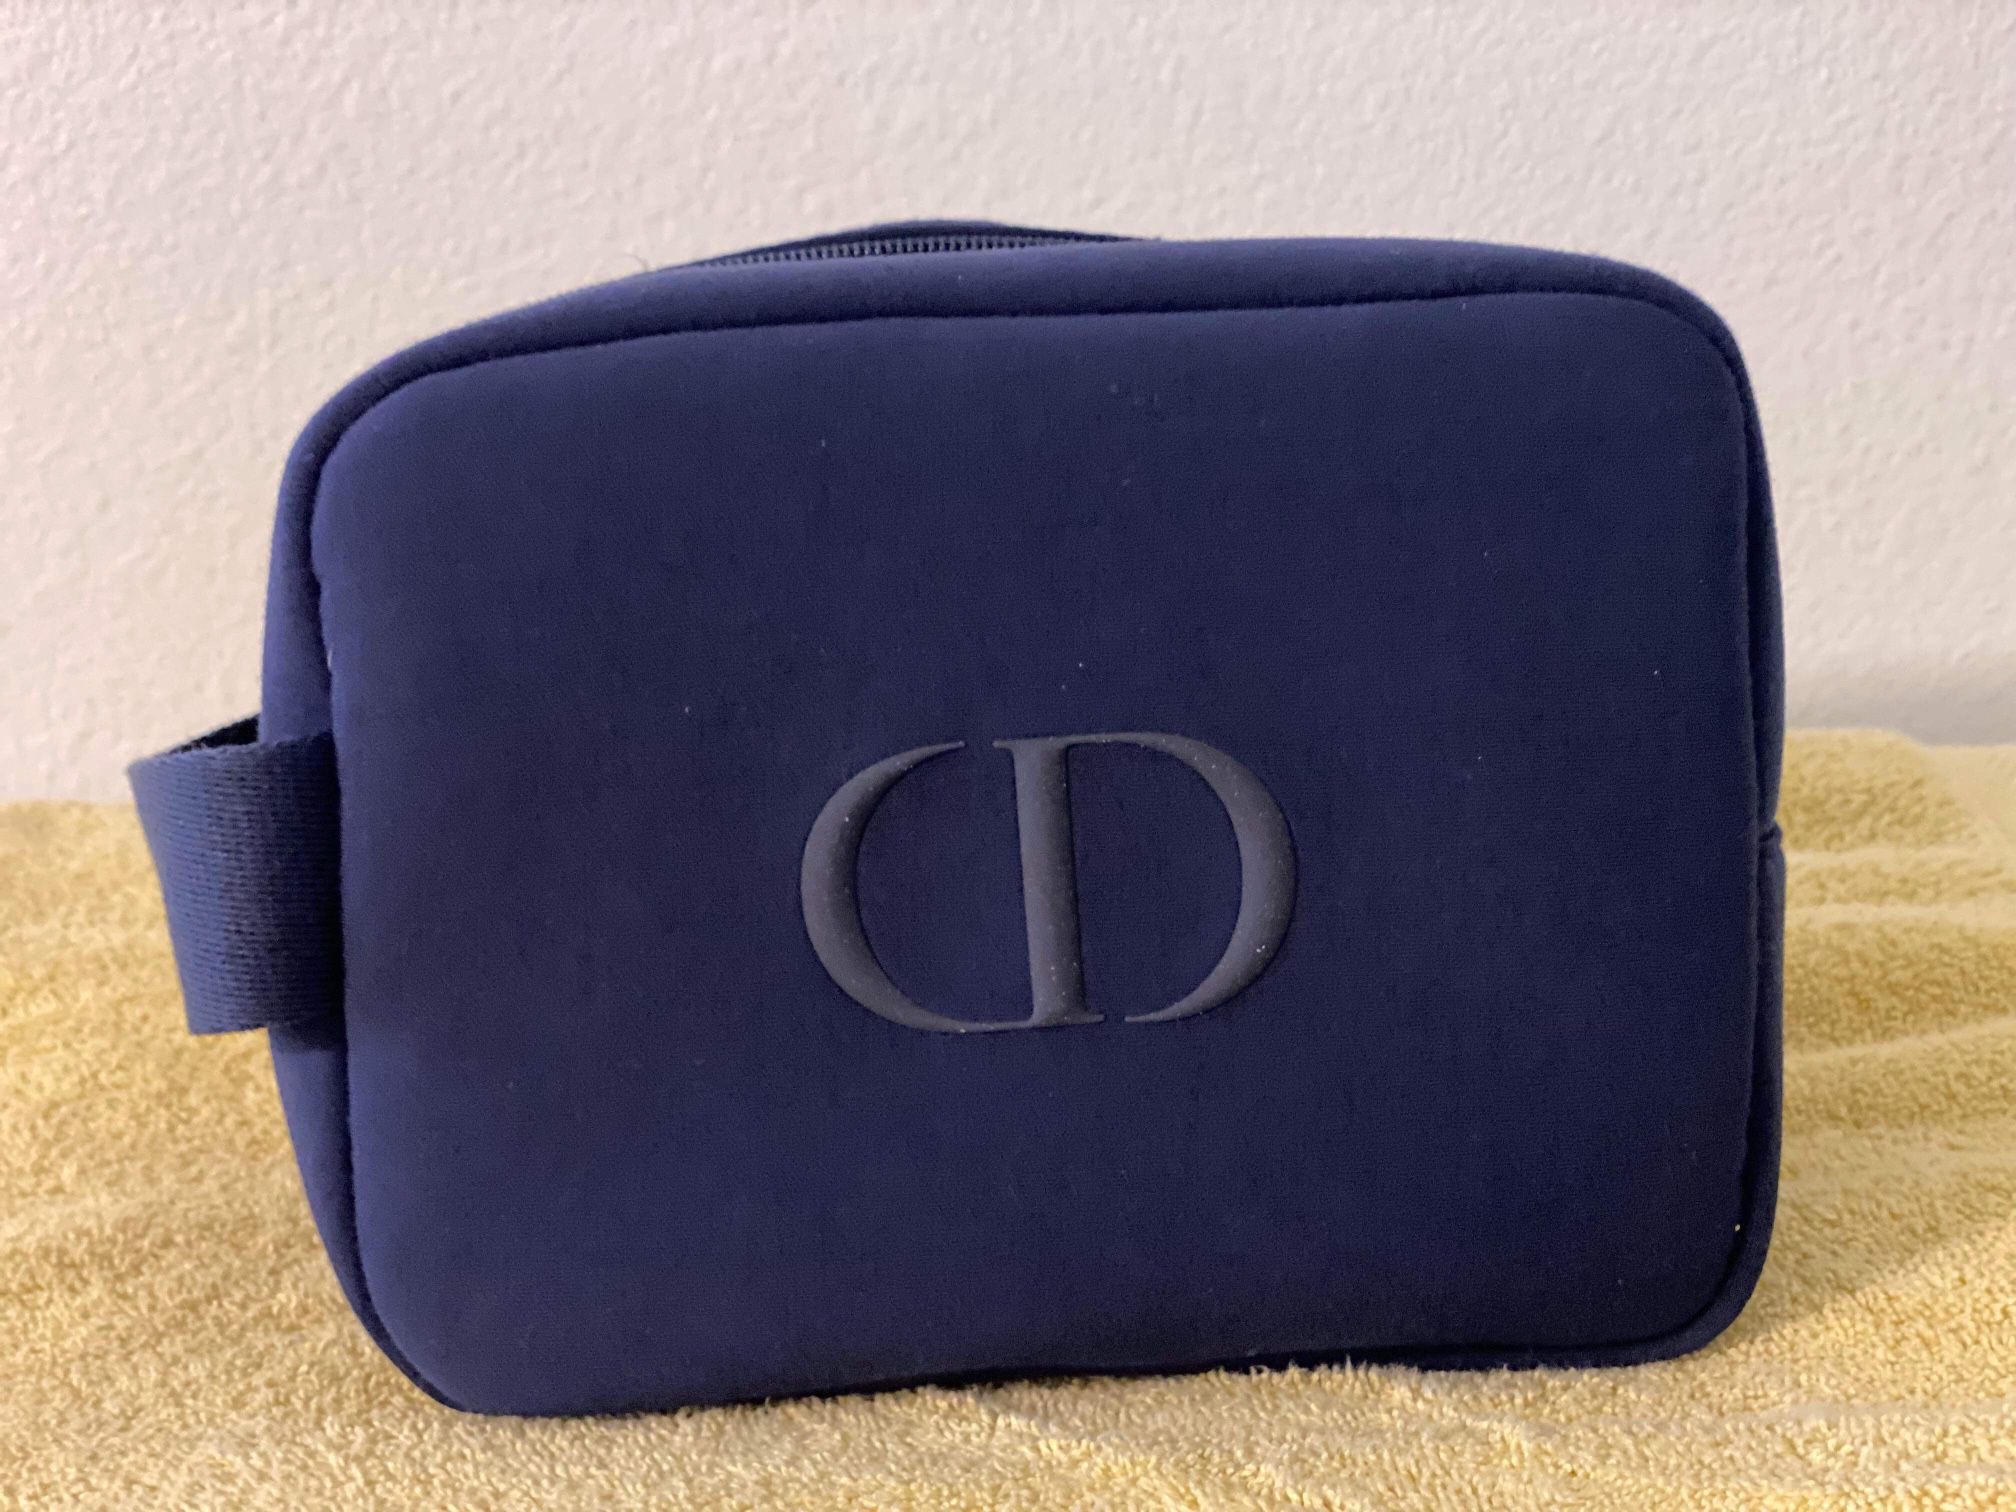 DIOR Beauty CD Logo BLUE Cosmetic Makecup Pouch